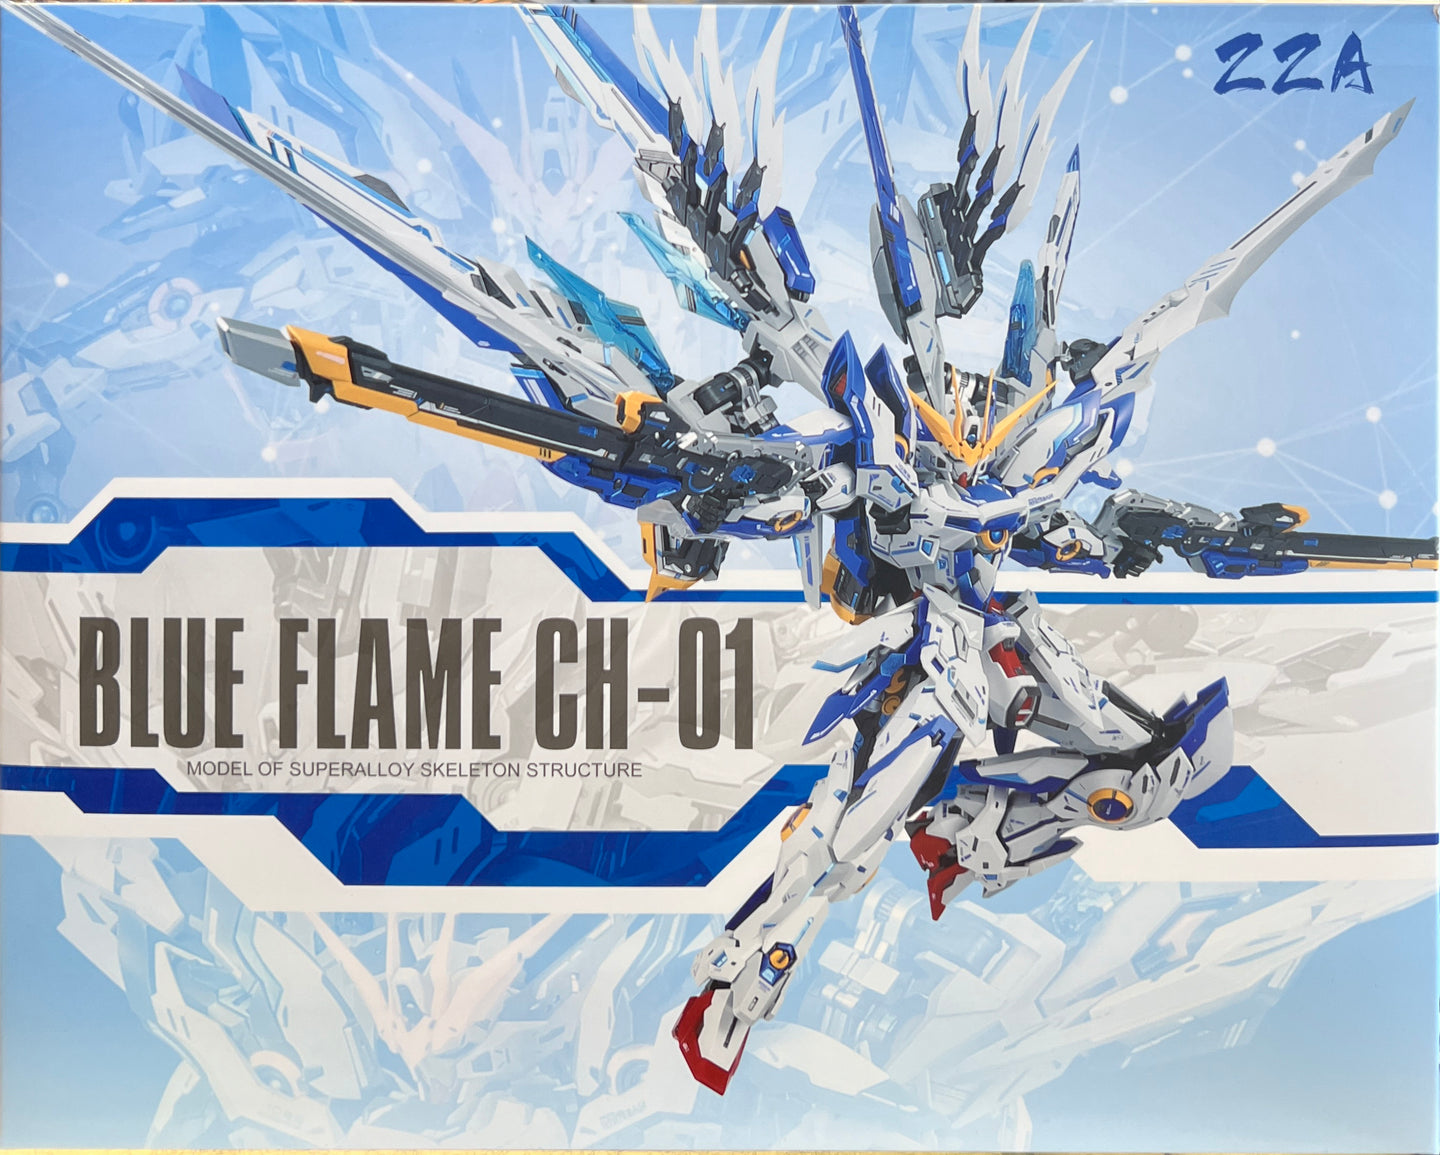 ZZA 1/100 Blue Flame CH-01 Super Alloy Skeleton Structure 010113 